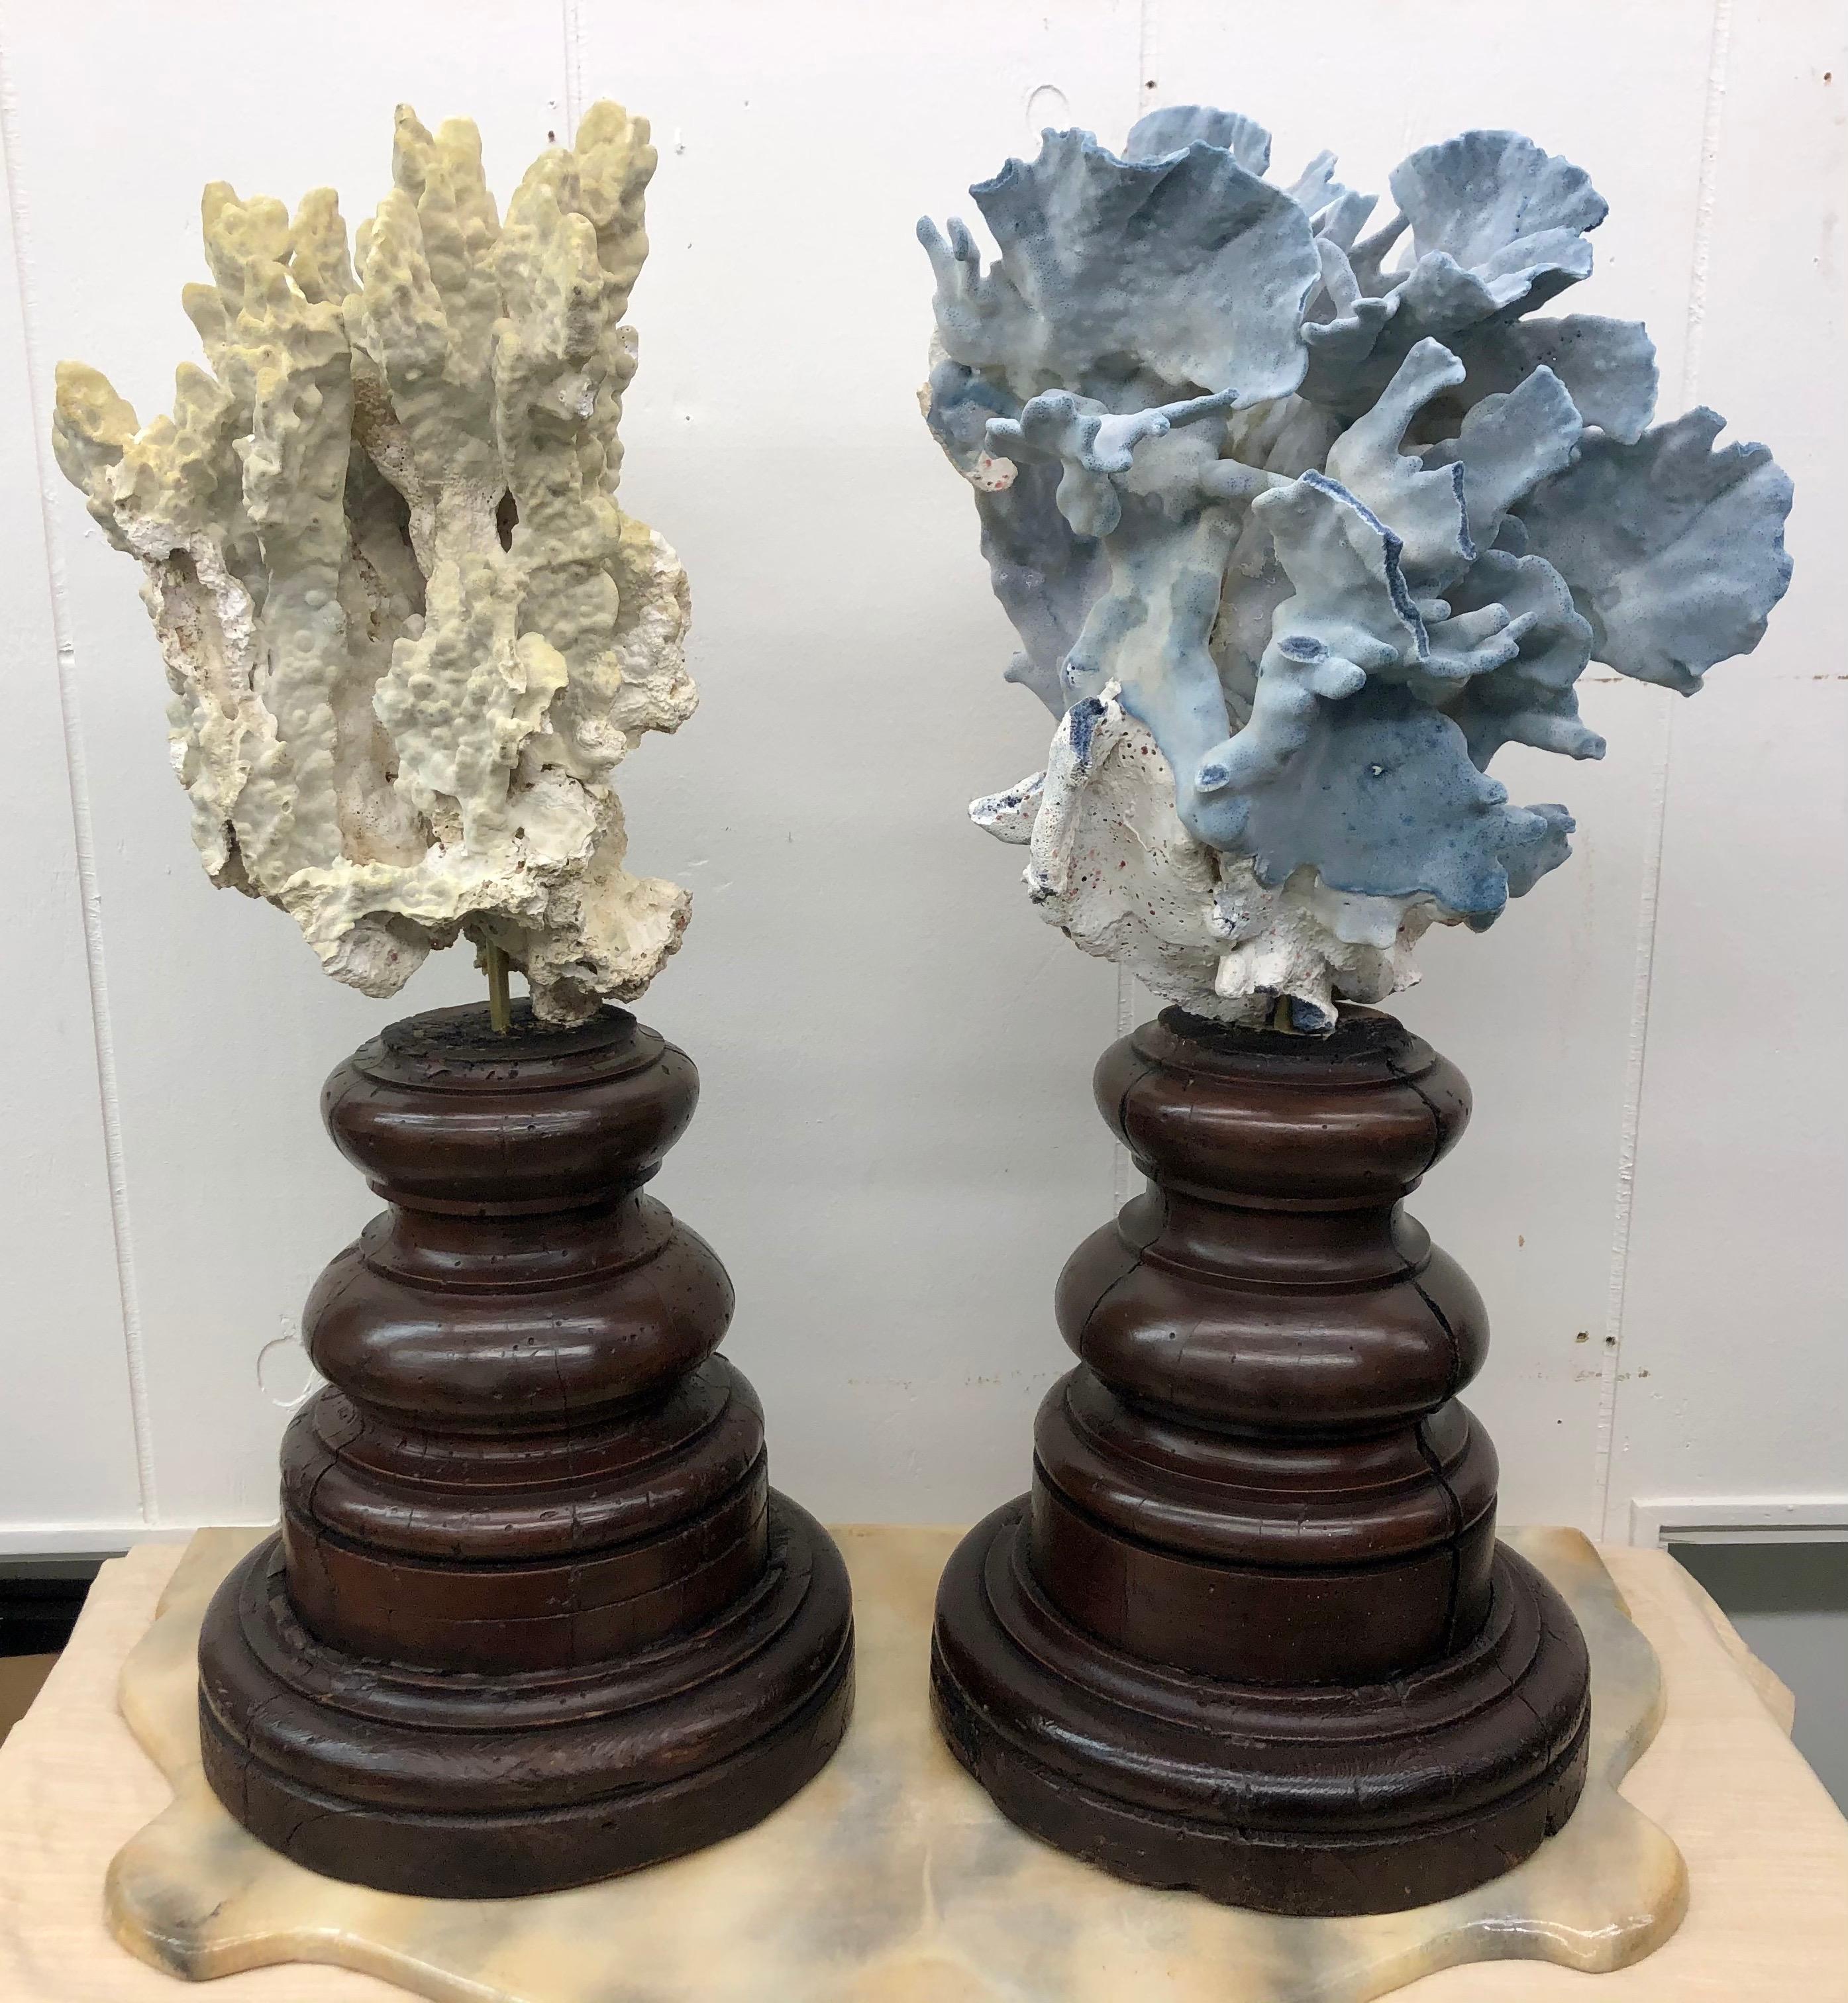 Pair of 18th century Italian base with grand specimen coral sculptures.